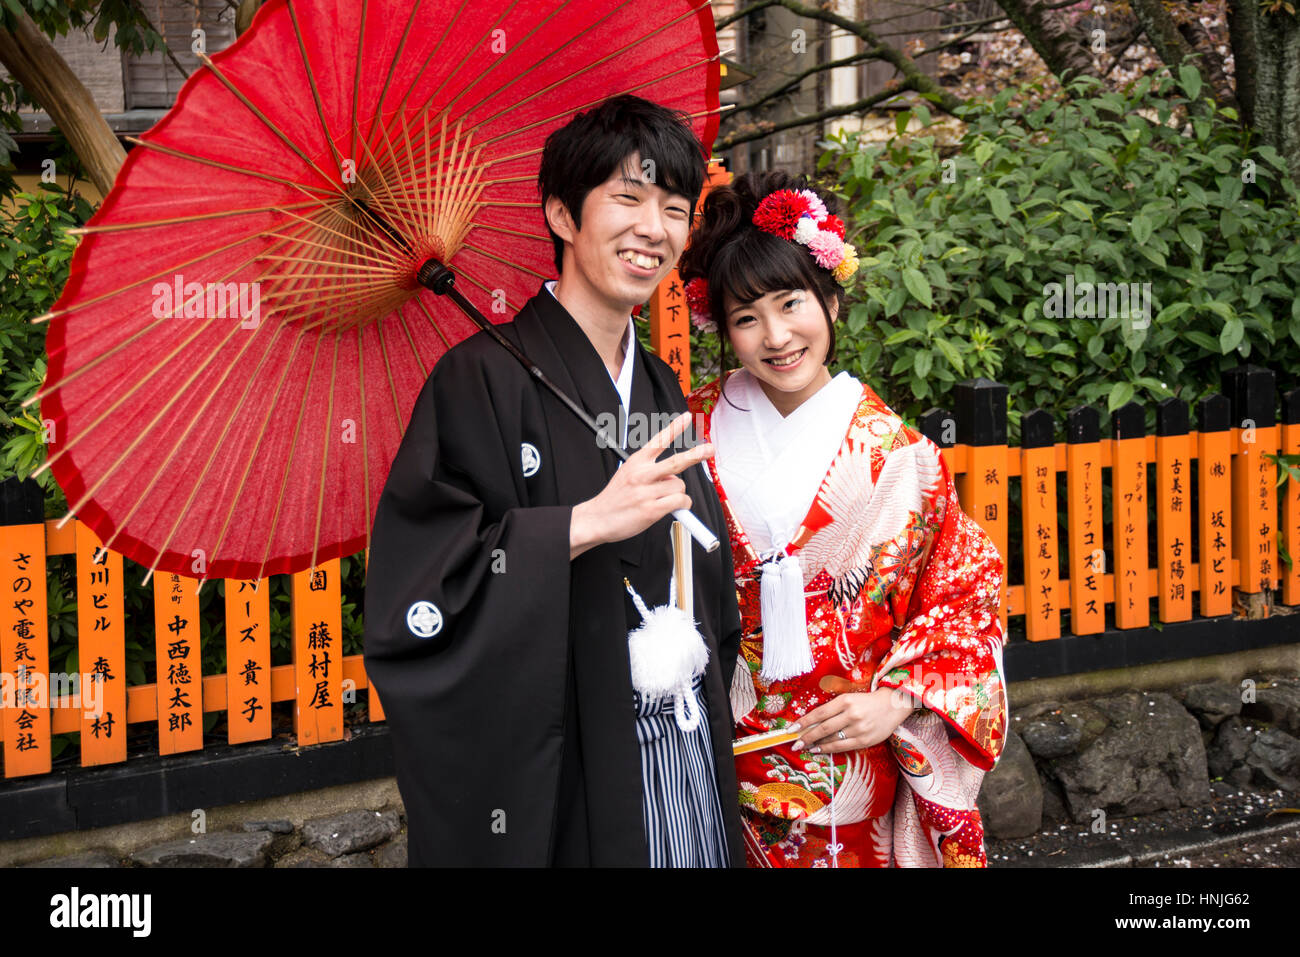 Newly weded young couple in traditional Japanese wedding attire posing for camera, Kyoto, Japan Stock Photo